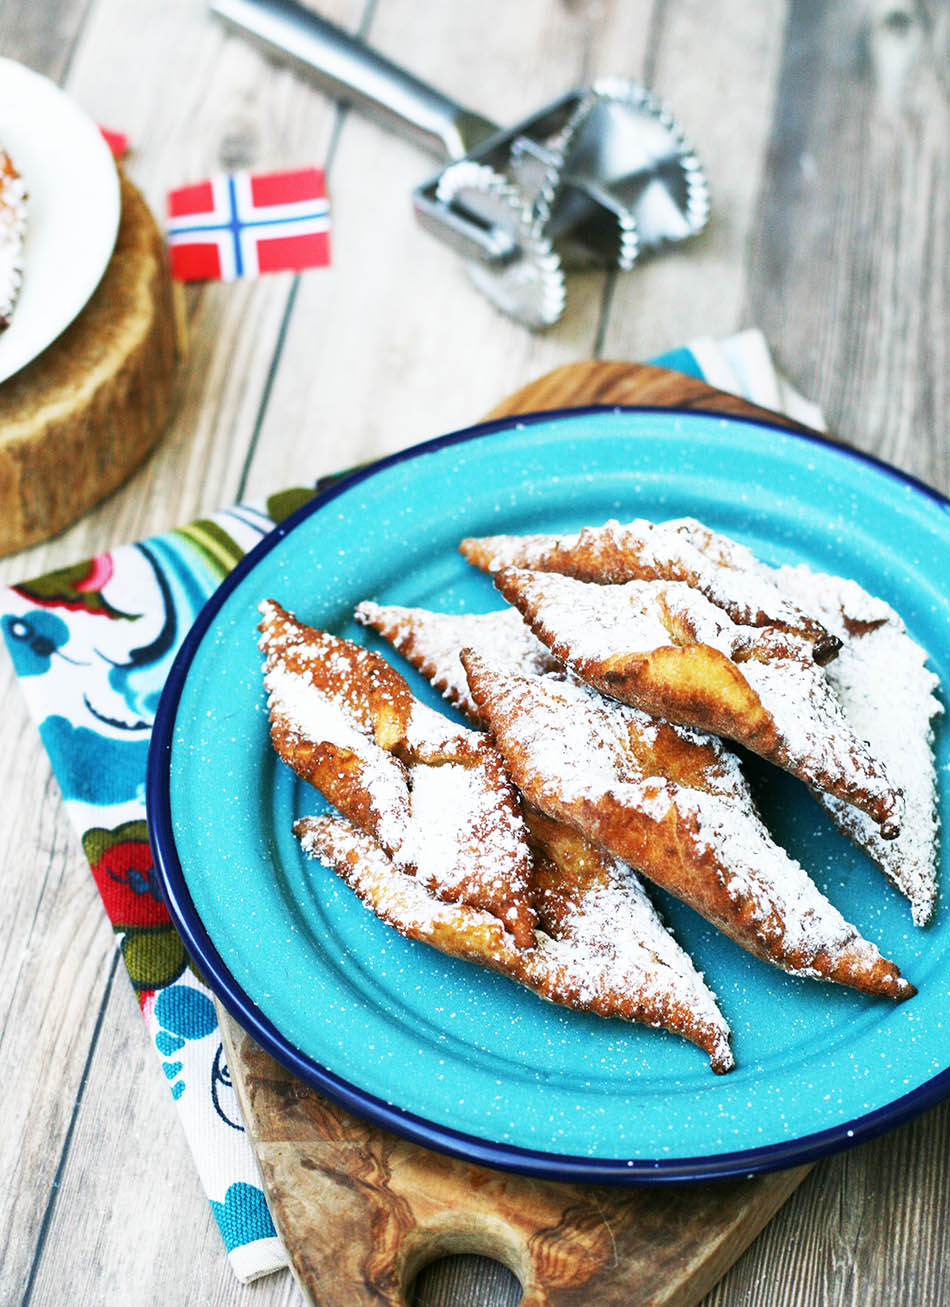 Norwegian fattigmand cookies: A beautifully shaped, fried cookie dusted with powdered sugar.